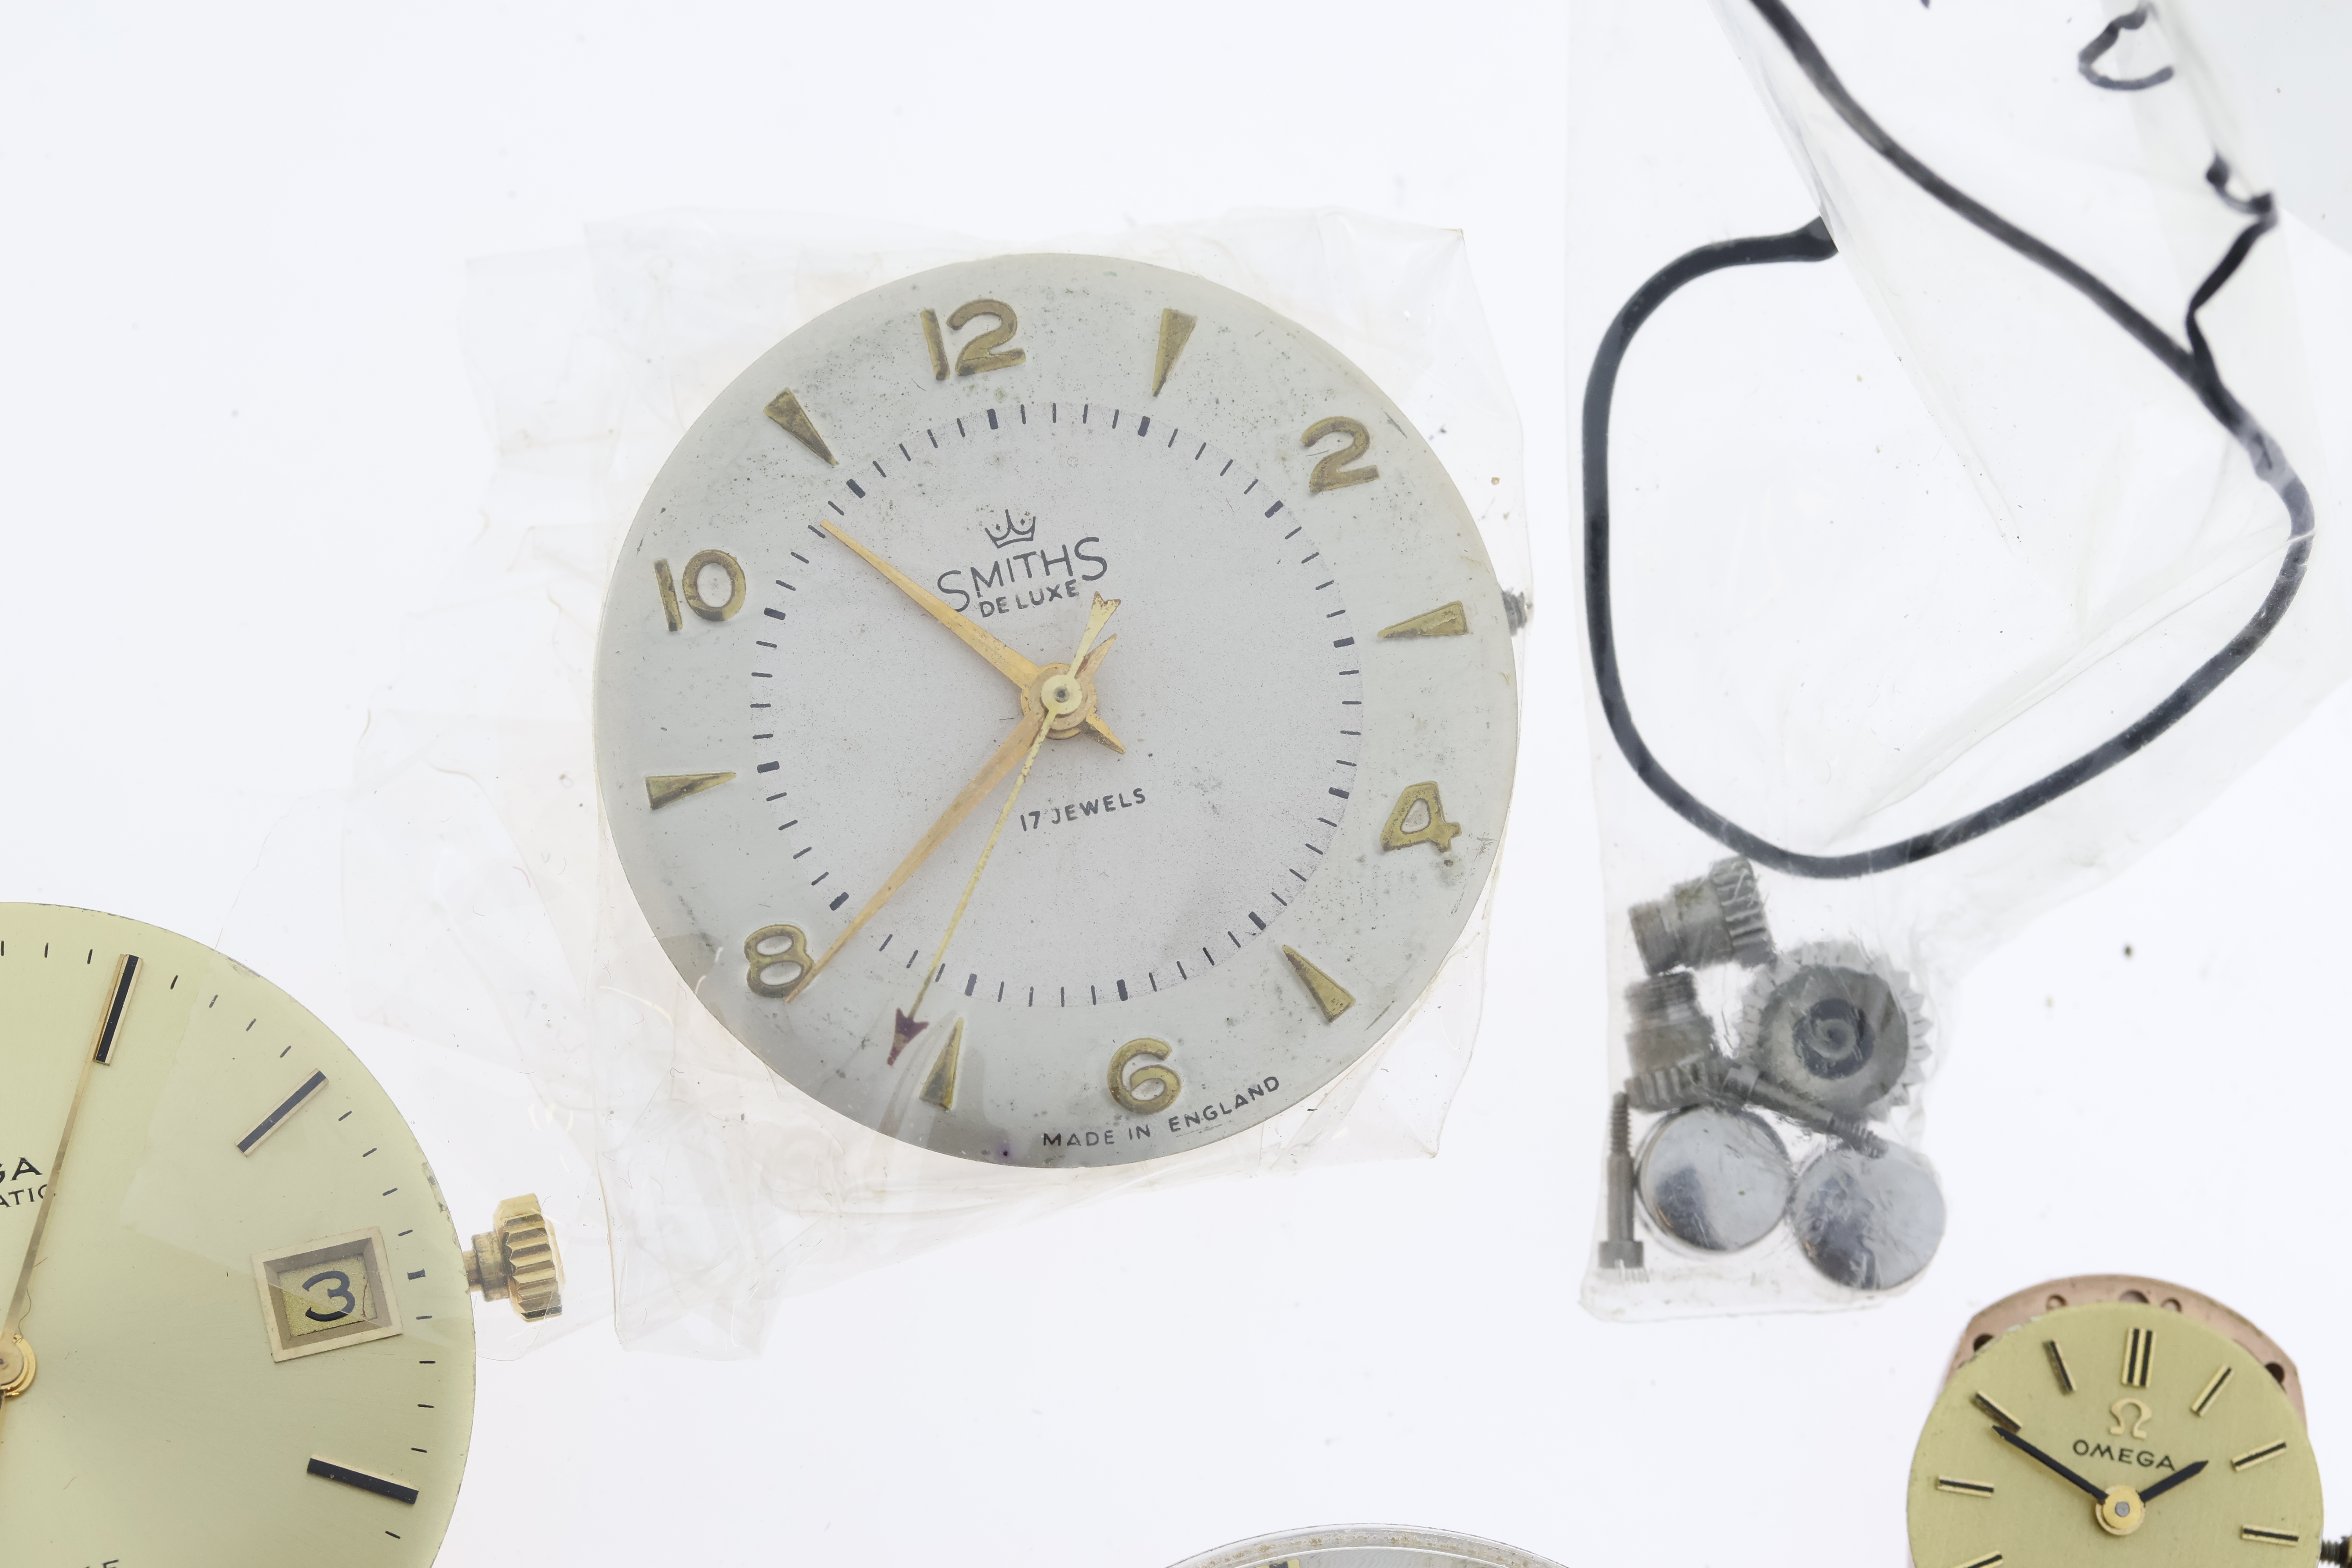 *TO BE SOLD WITHOUT RESERVE* Job lot of Movement & Dials, Including Omega & Jaquet Droz, *AS FOUND* - Image 4 of 6